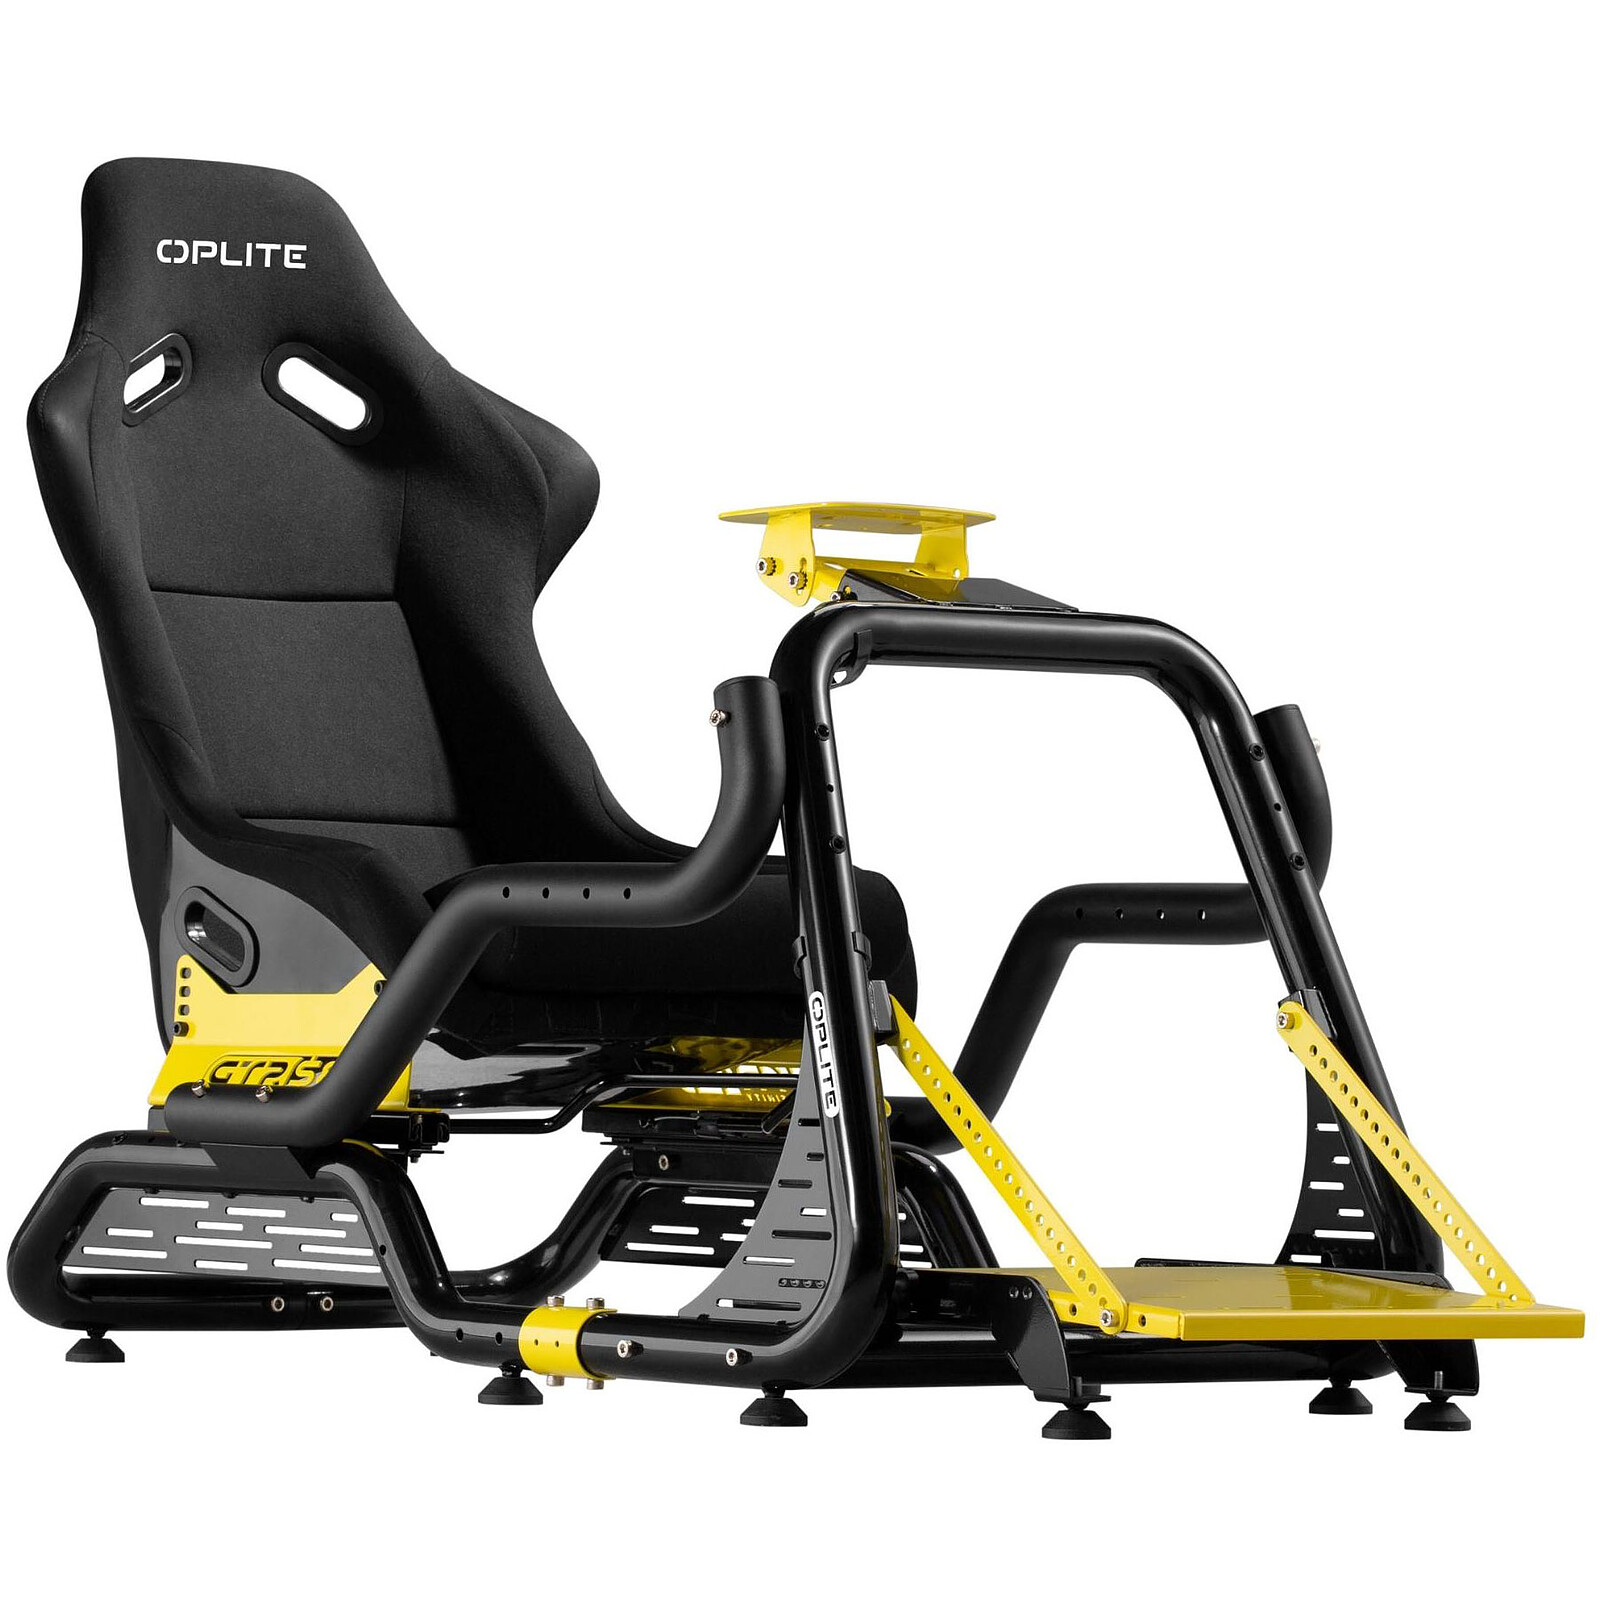 OPLITE GTR Elite Yellow - Other gaming accessories - LDLC 3-year